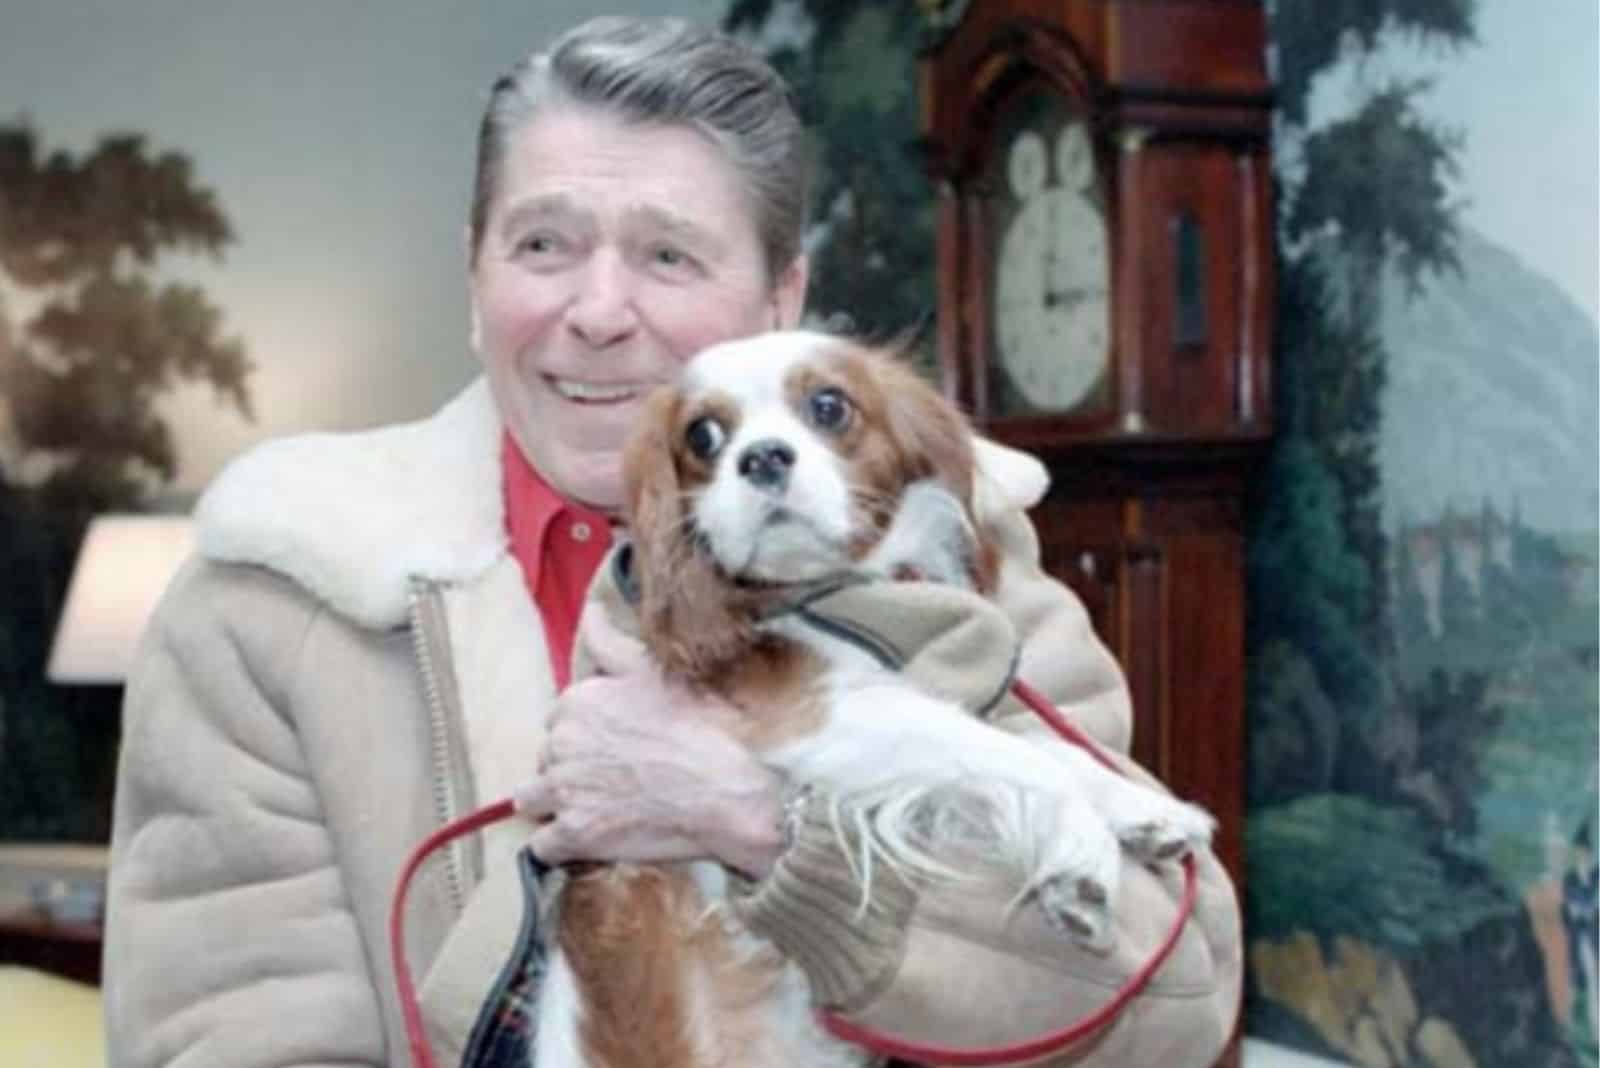 Rex Reagan holds a dog in his arms